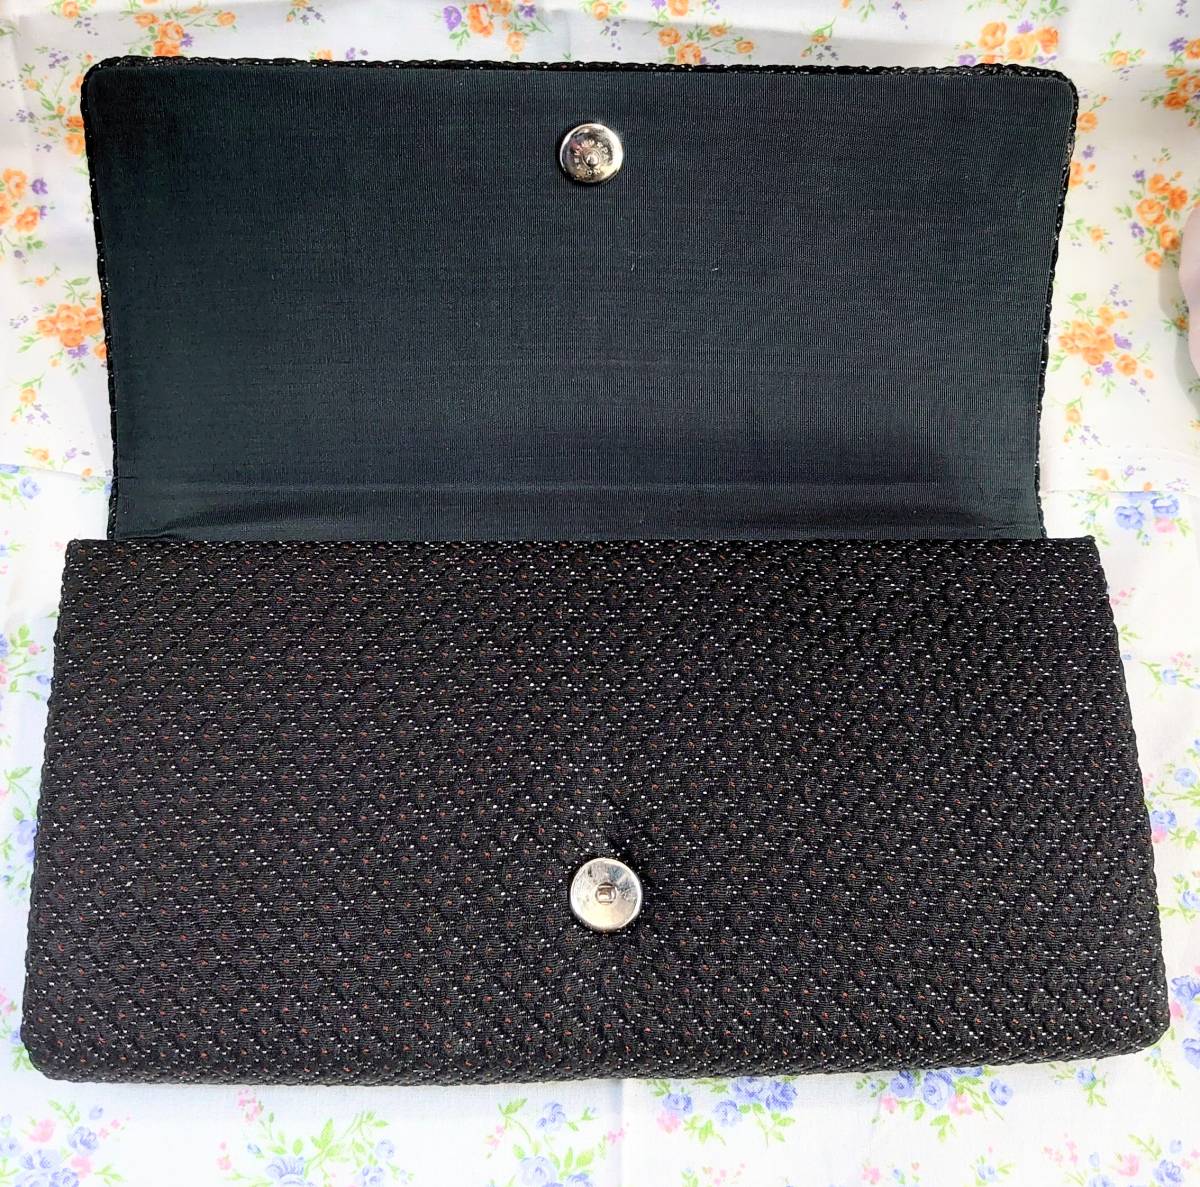 [ clutch back ] ceremonial occasions . exactly! black. clutch back kimono small articles 